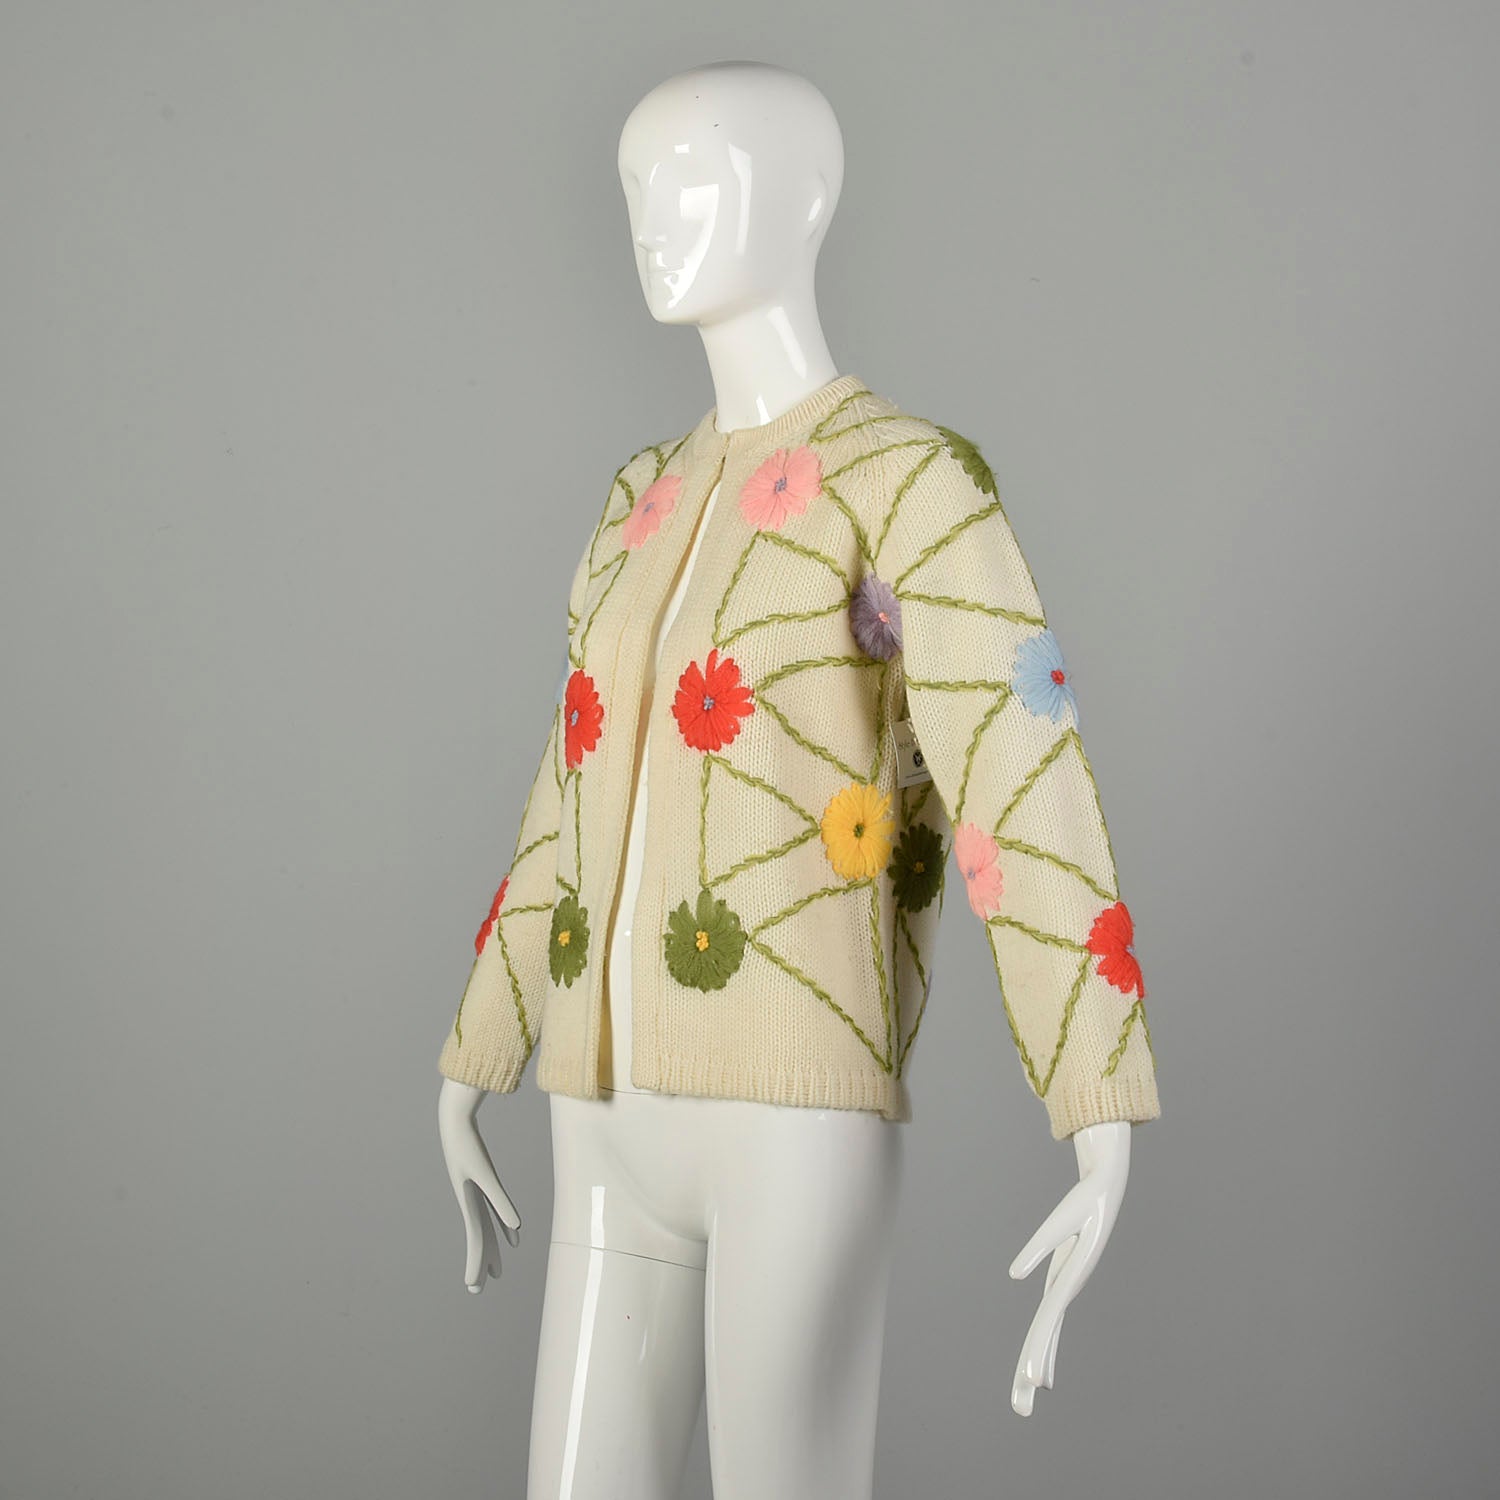 Small 1960s Embroidered Cardigan Sweater Colorful Flowers On Off-White Knit